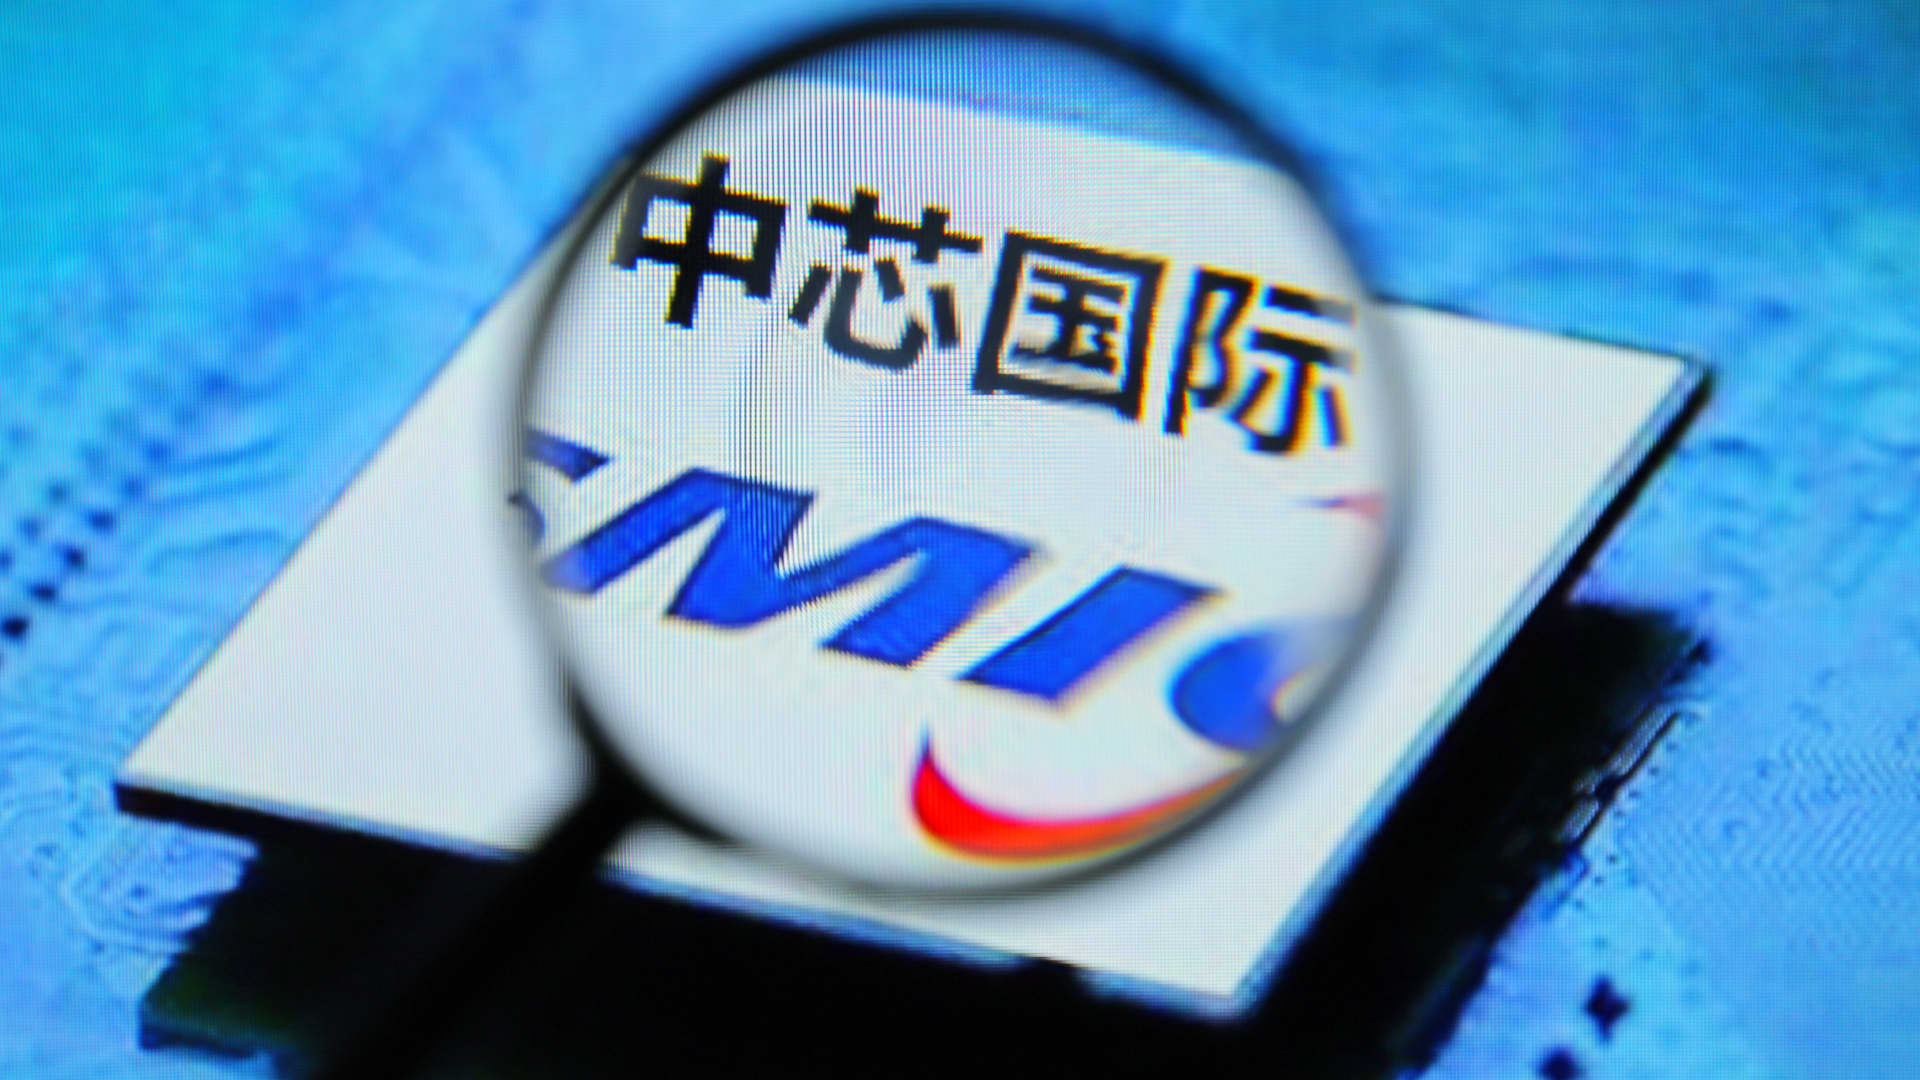 China's biggest chipmaker SMIC posts record 2022 revenue but warns of a tough year ahead